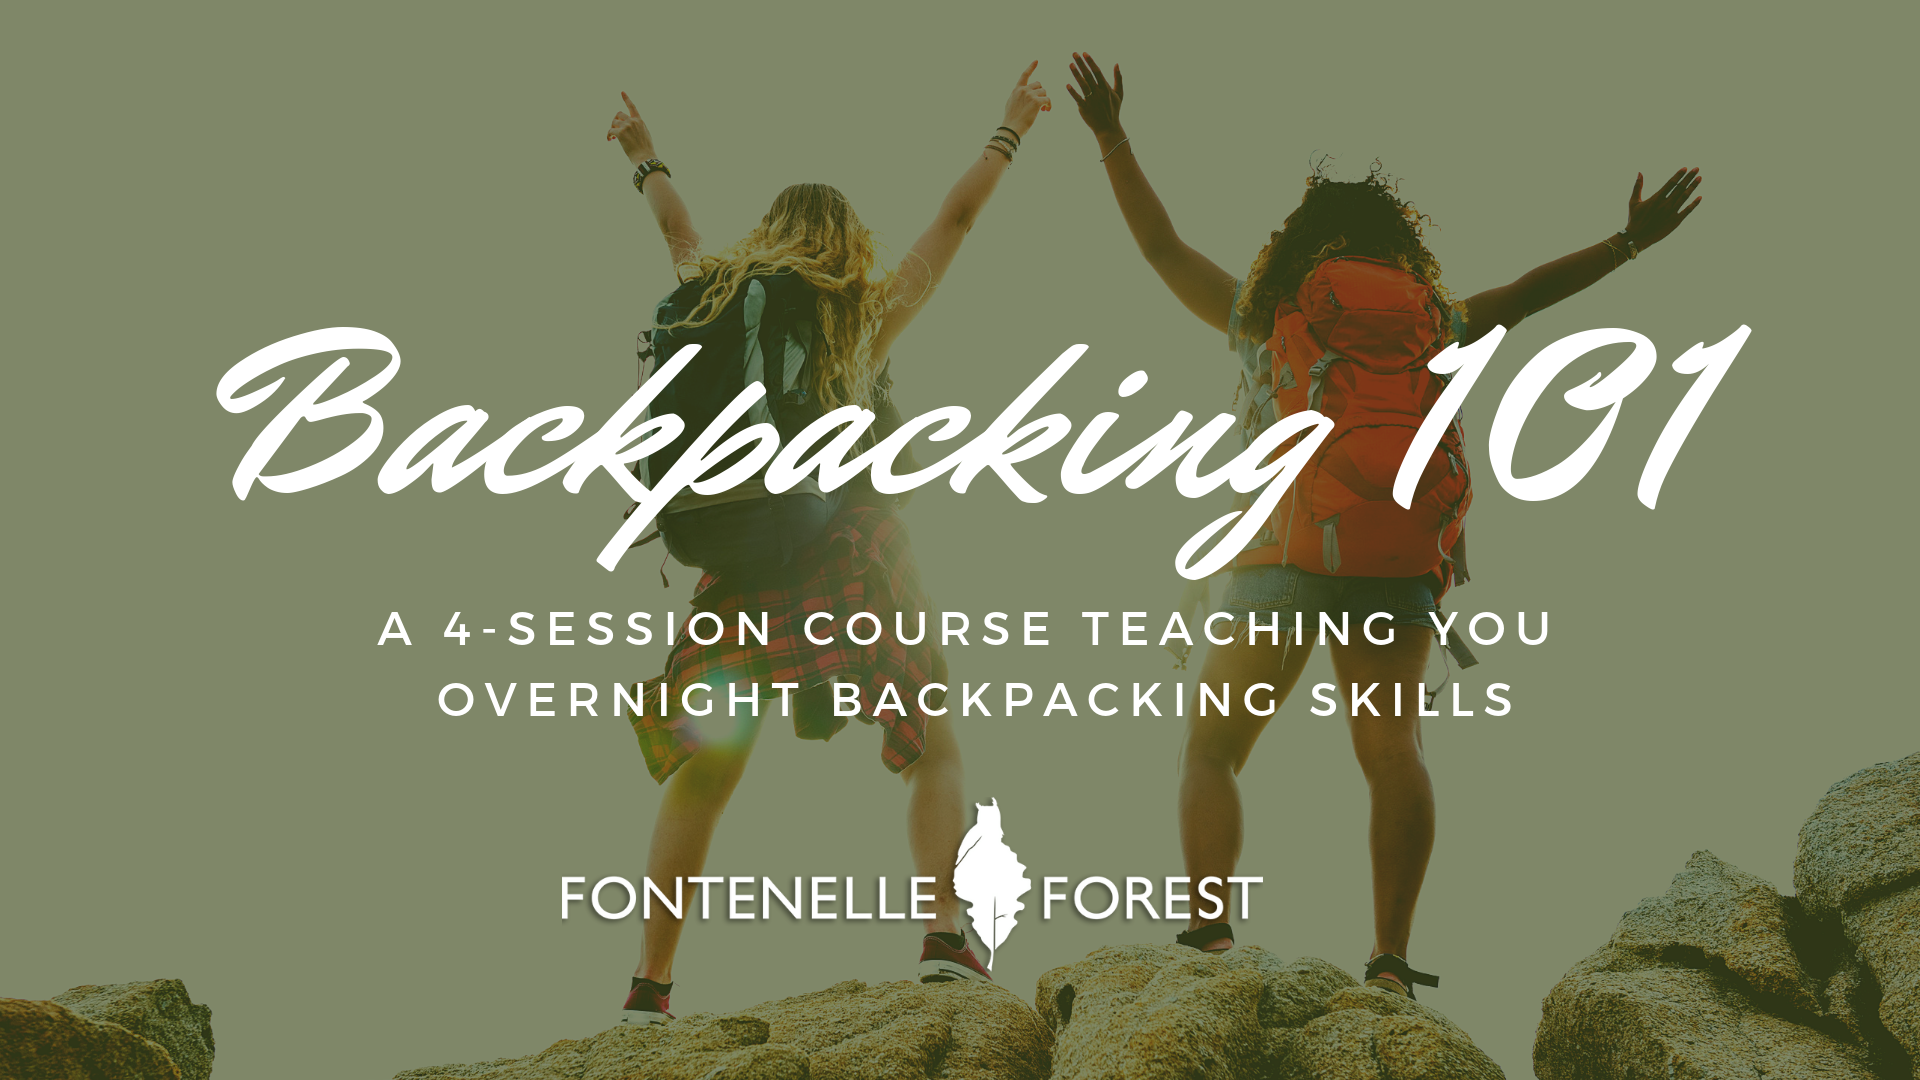 Backpacking 101 graphic